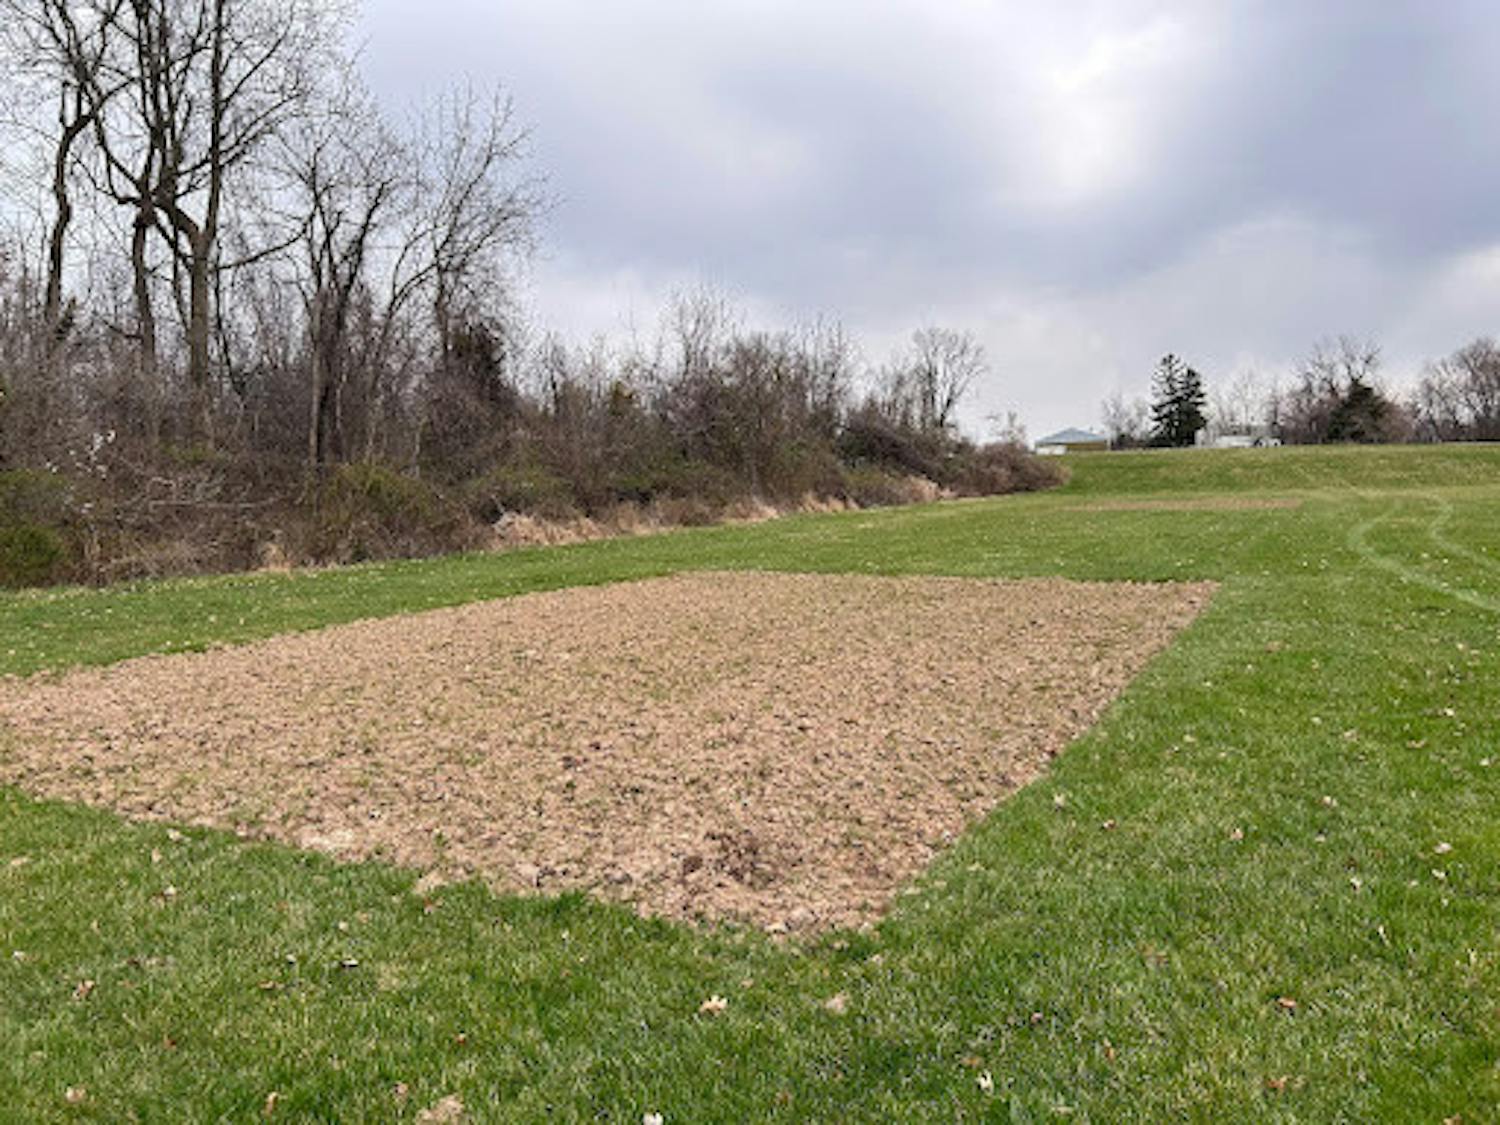 One of two tilled plots ready for planting, located behind the soccer field and Decker Hall (Photo by Hanna Stuzman).